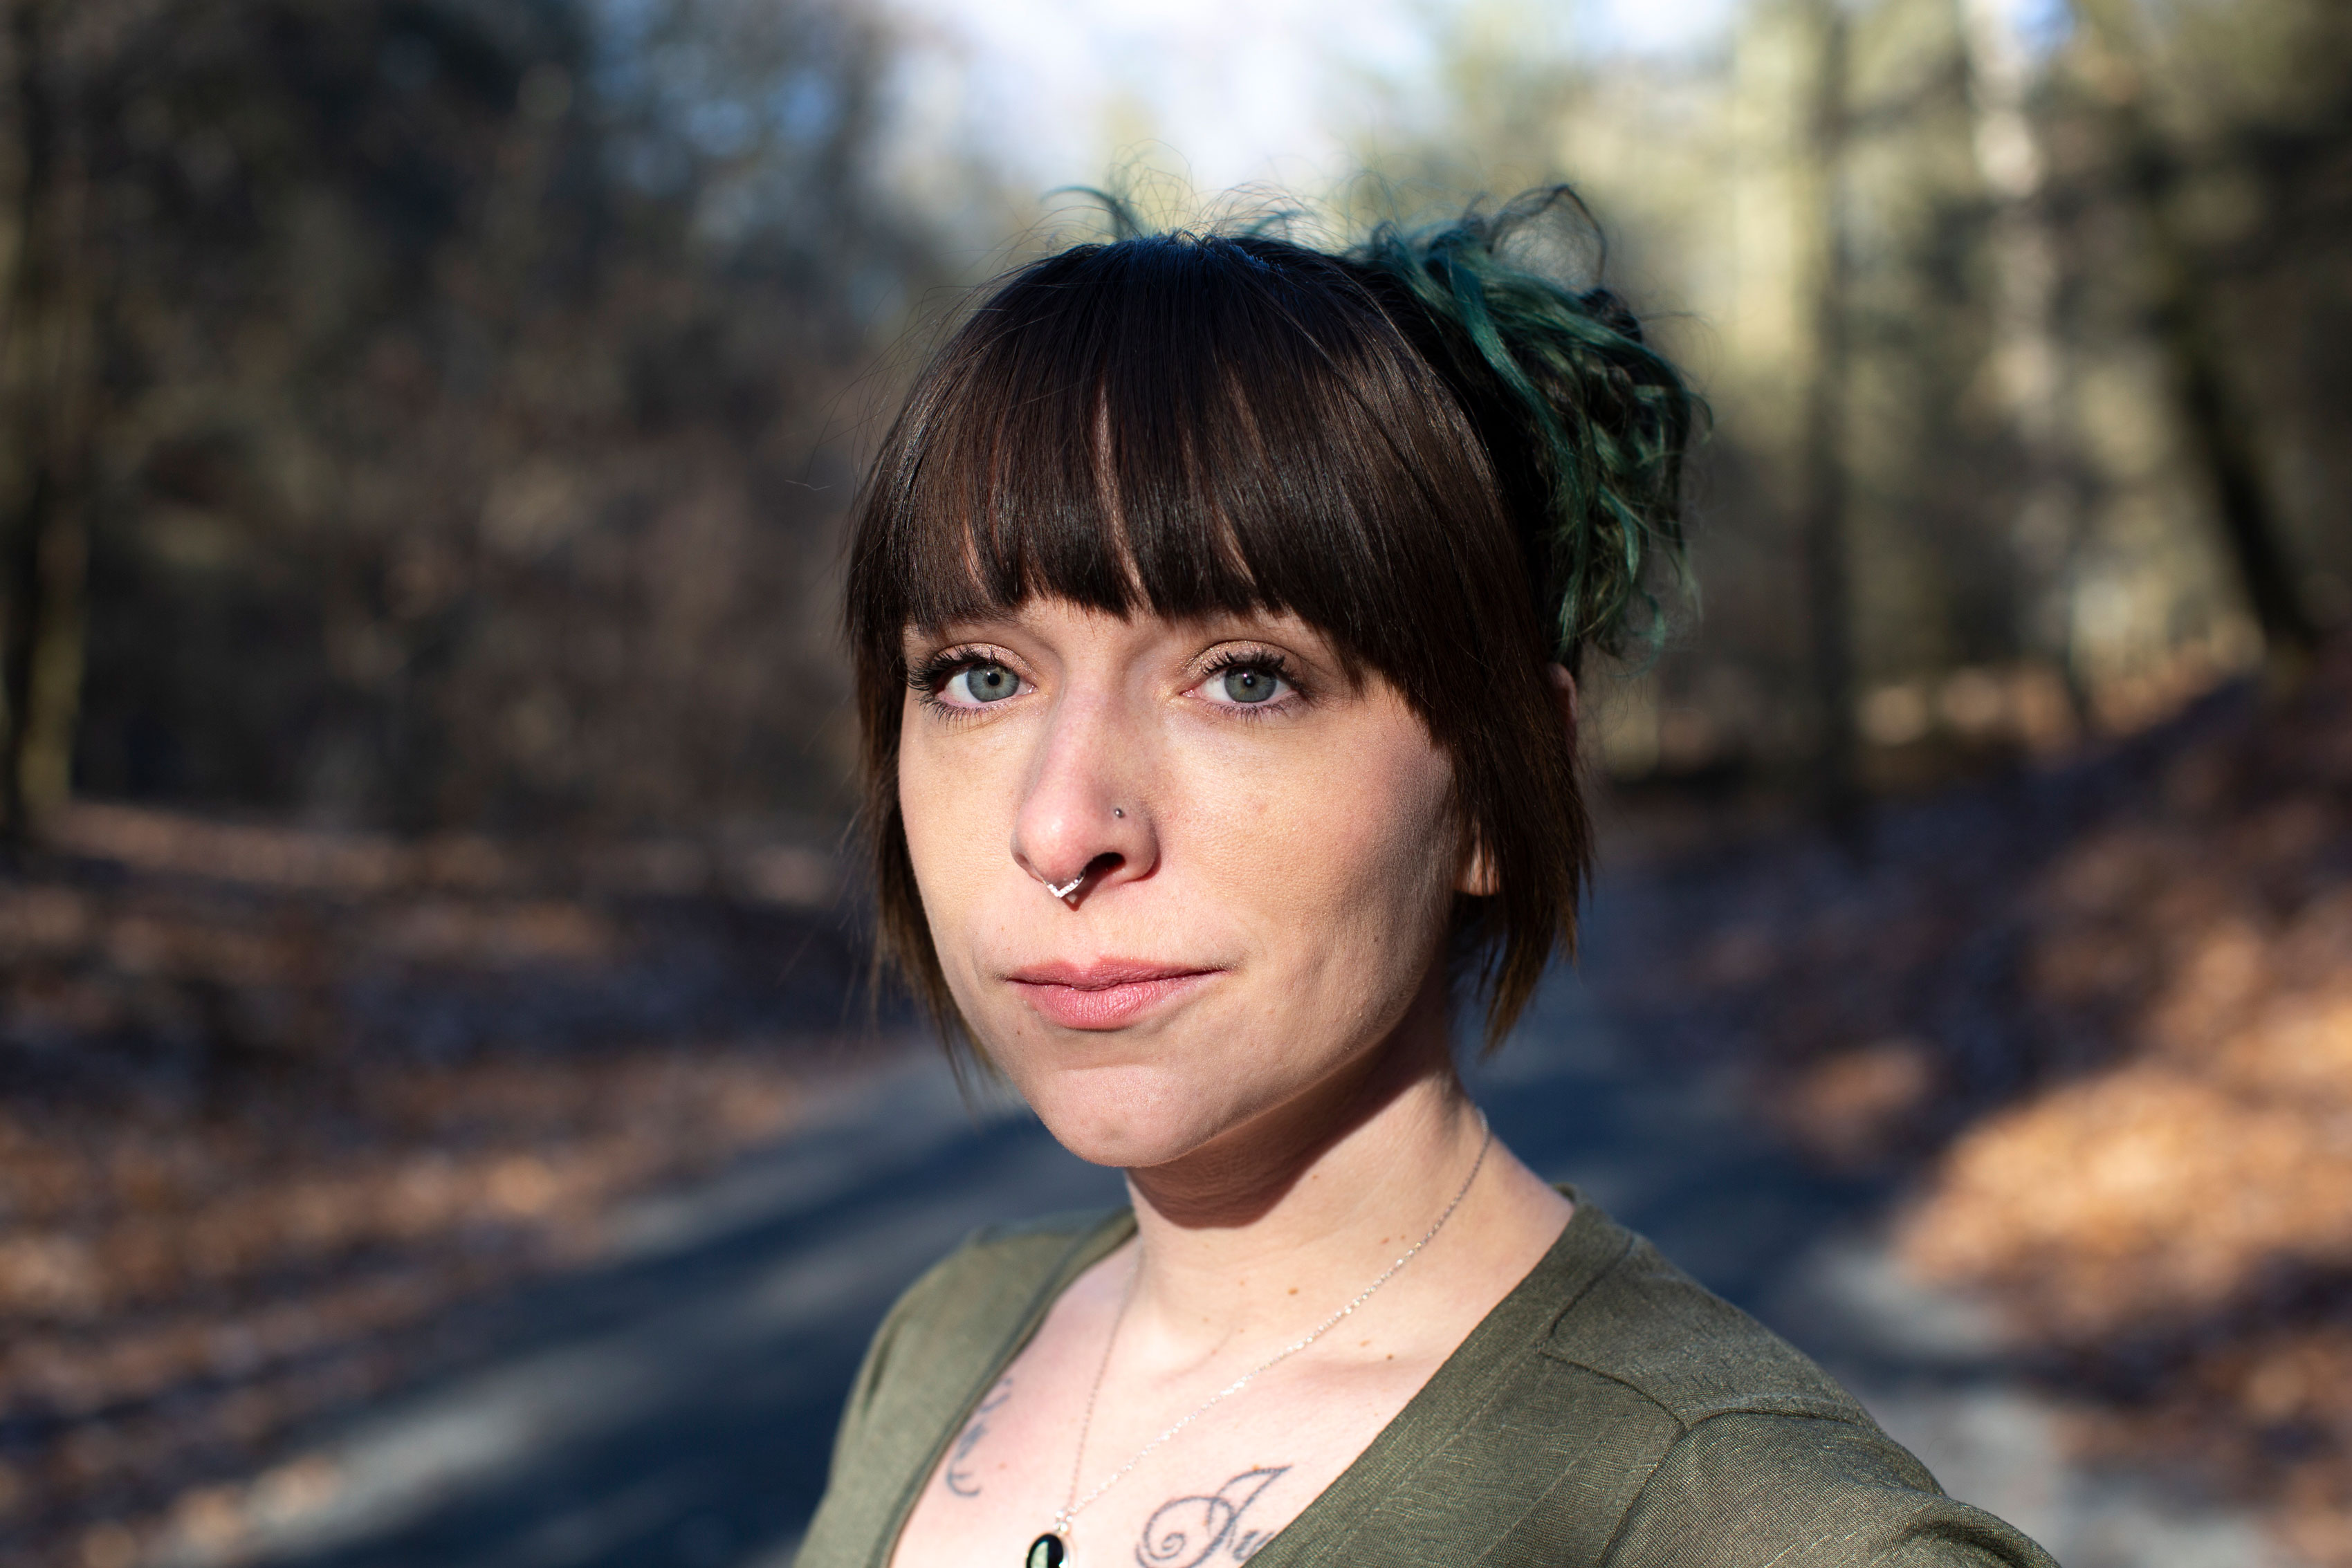 A close-up image of a woman standing outside in the woods and looking at the camera.